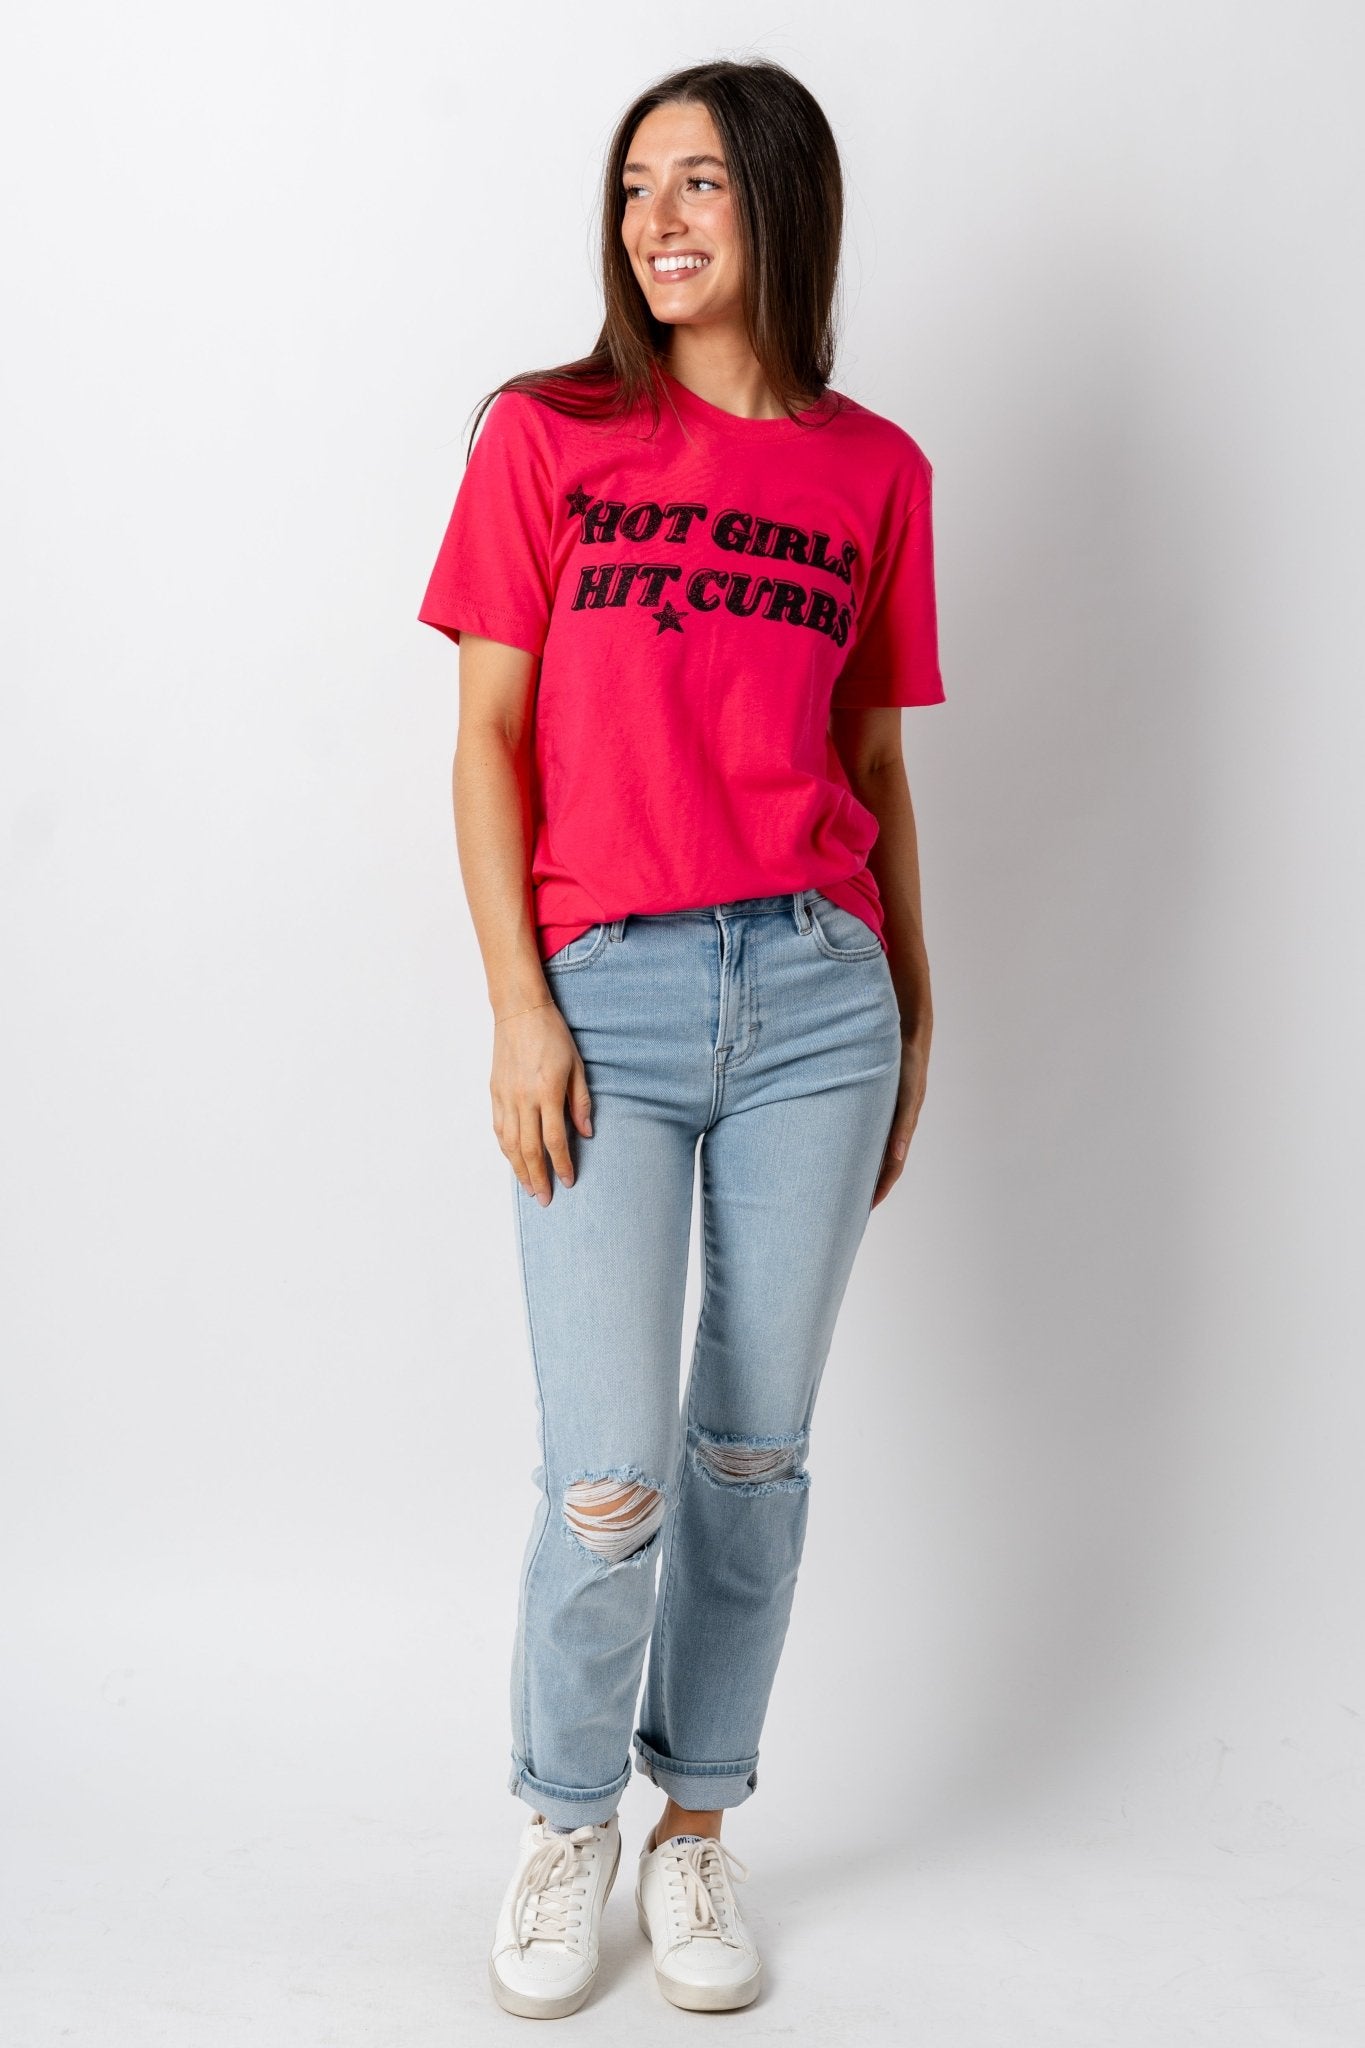 Shop for Pink, Tops & T-Shirts, Fashion